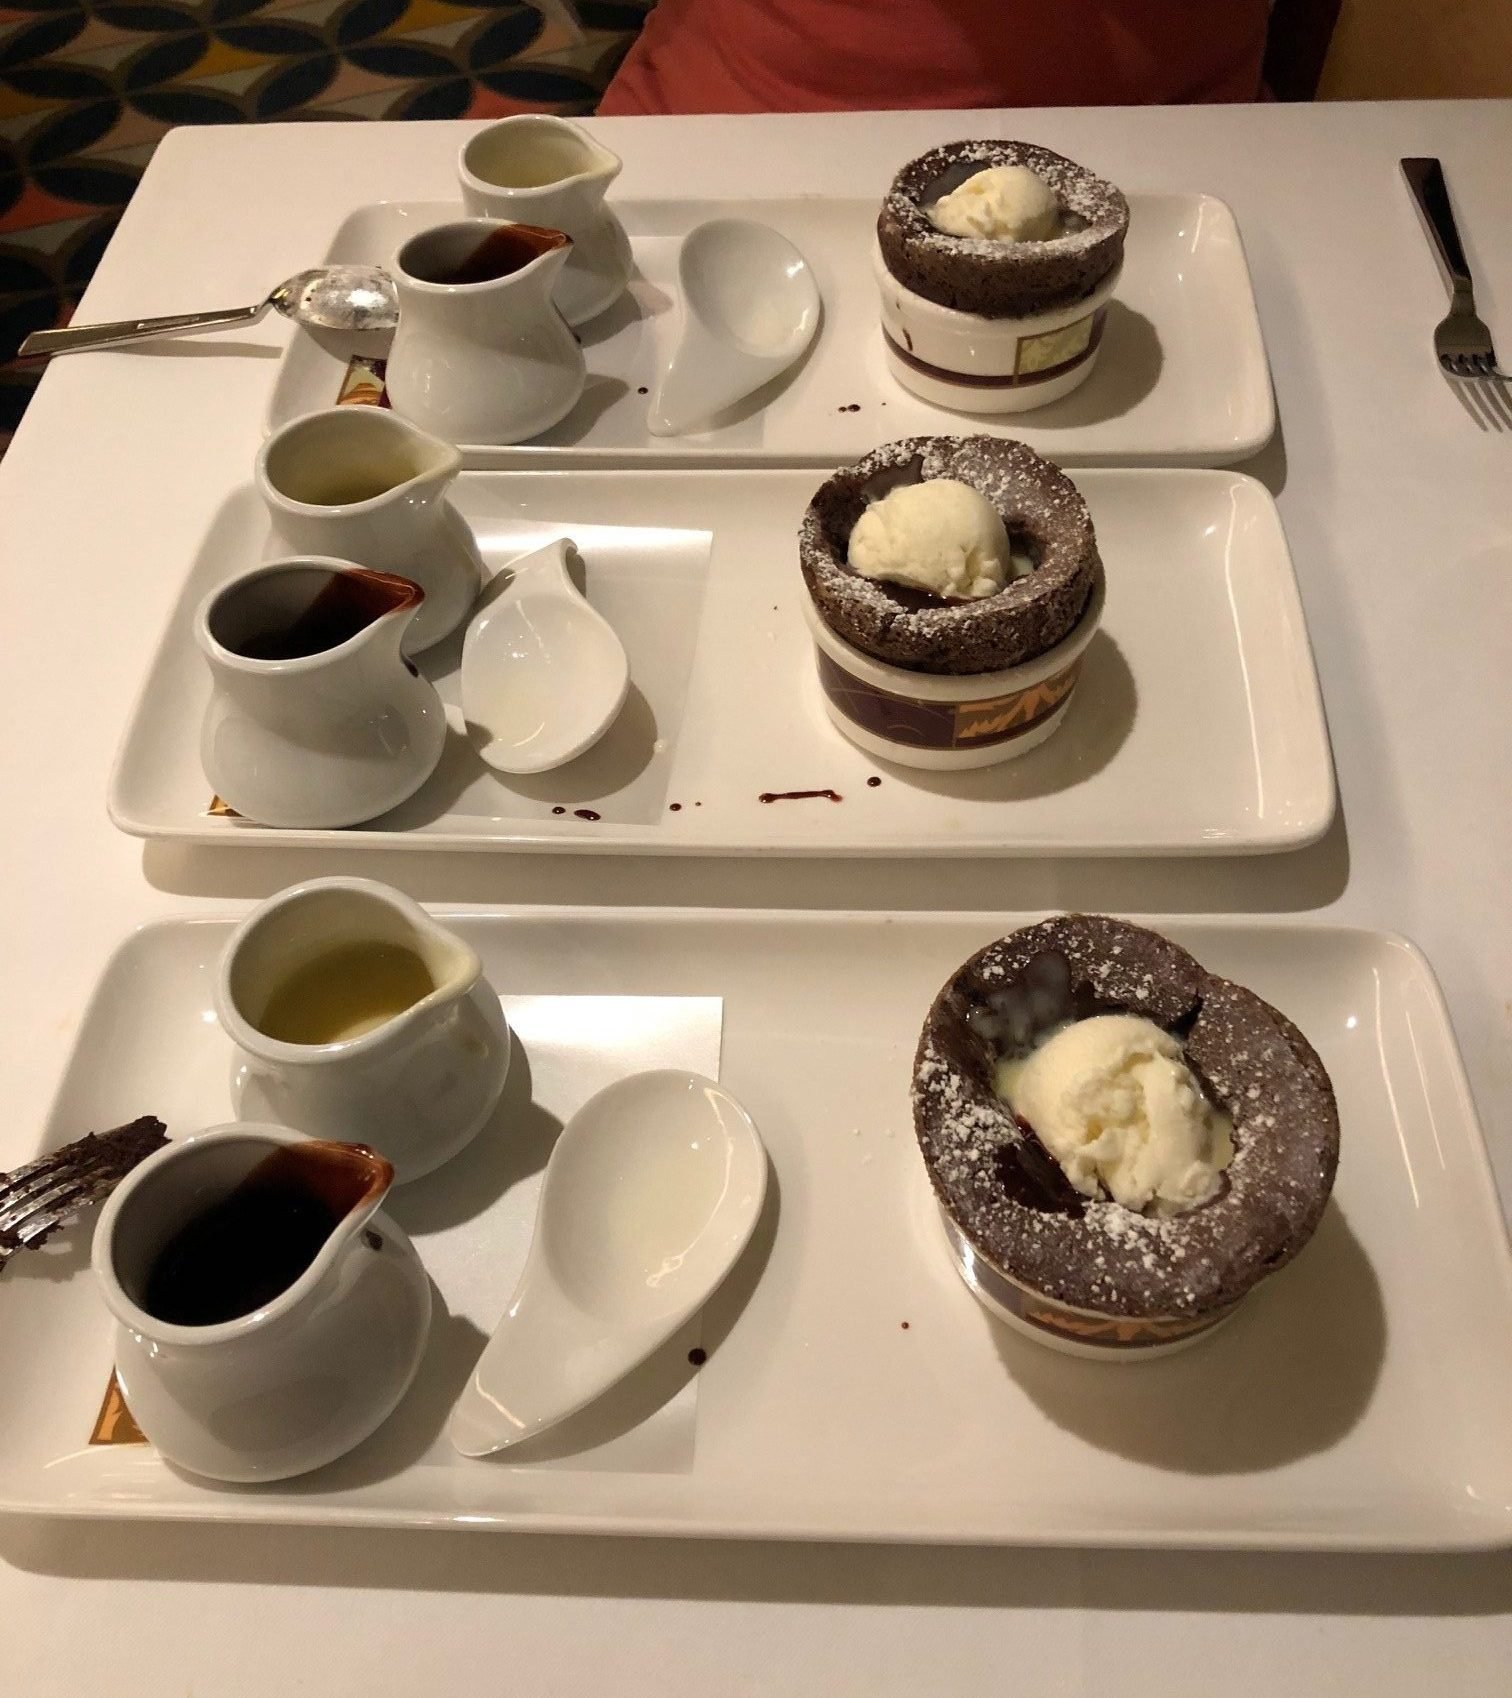 Chocolate souffle with sauces on a white plate